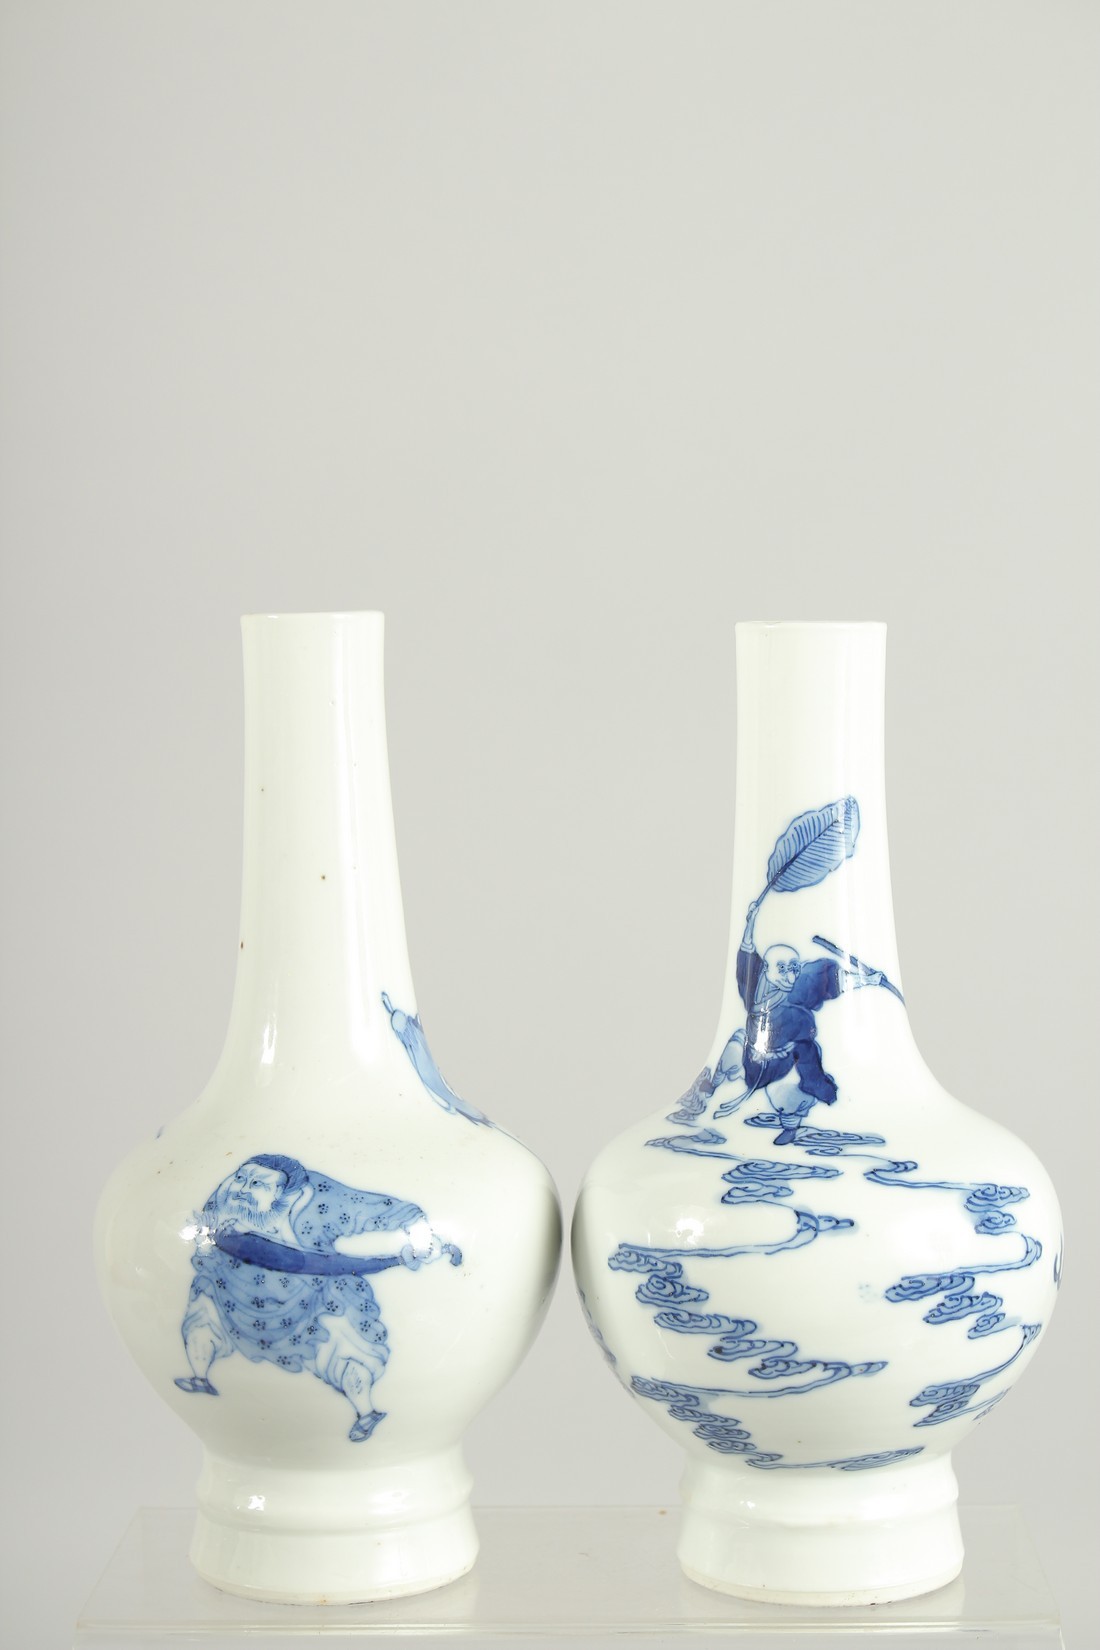 A FINE PAIR OF CHINESE BLUE AND WHITE PORCELAIN BOTTLE VASES, one painted with a warrior riding a - Image 3 of 8